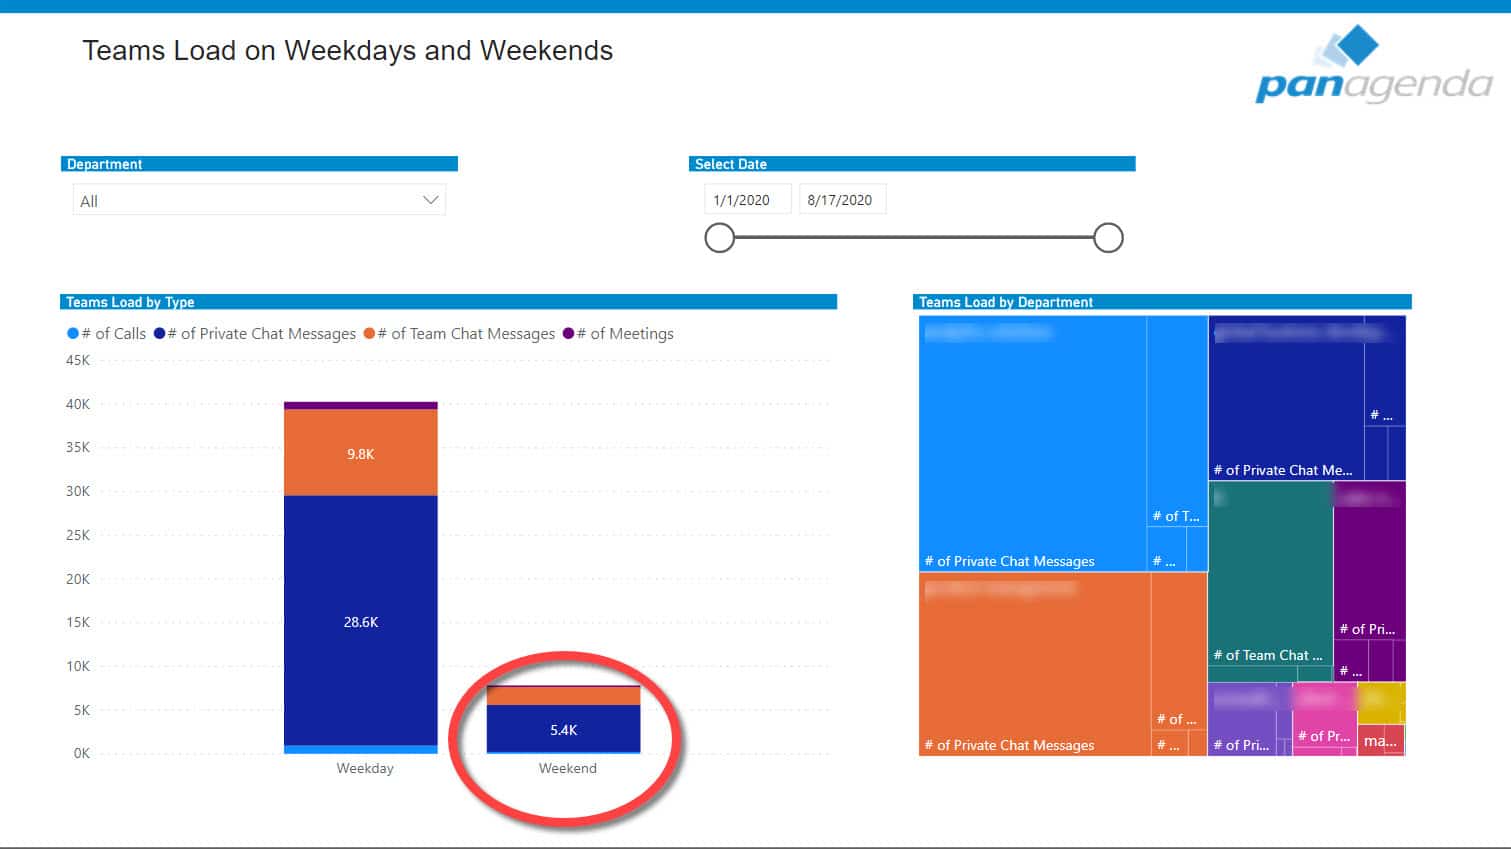 MS Teams Load Analysis Comparison on Weekdays and Weekends